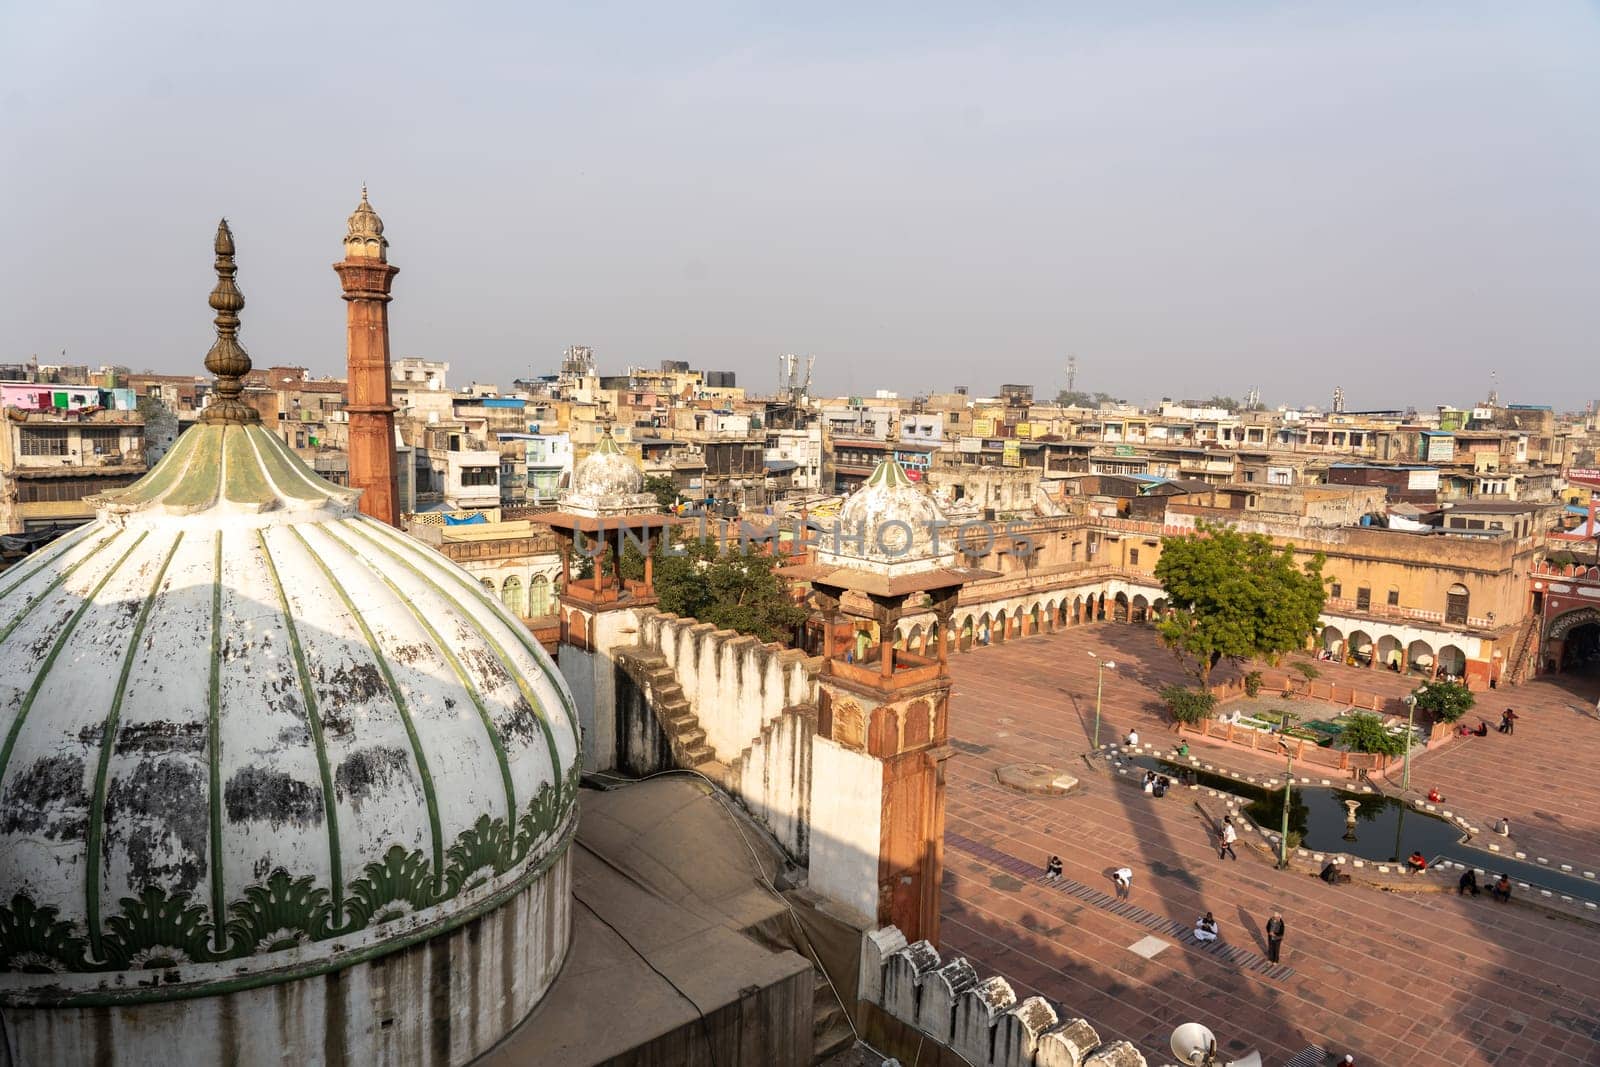 Delhi, India - December 04, 2019: High angle view of Jama Masjid from one of the minaret towers.